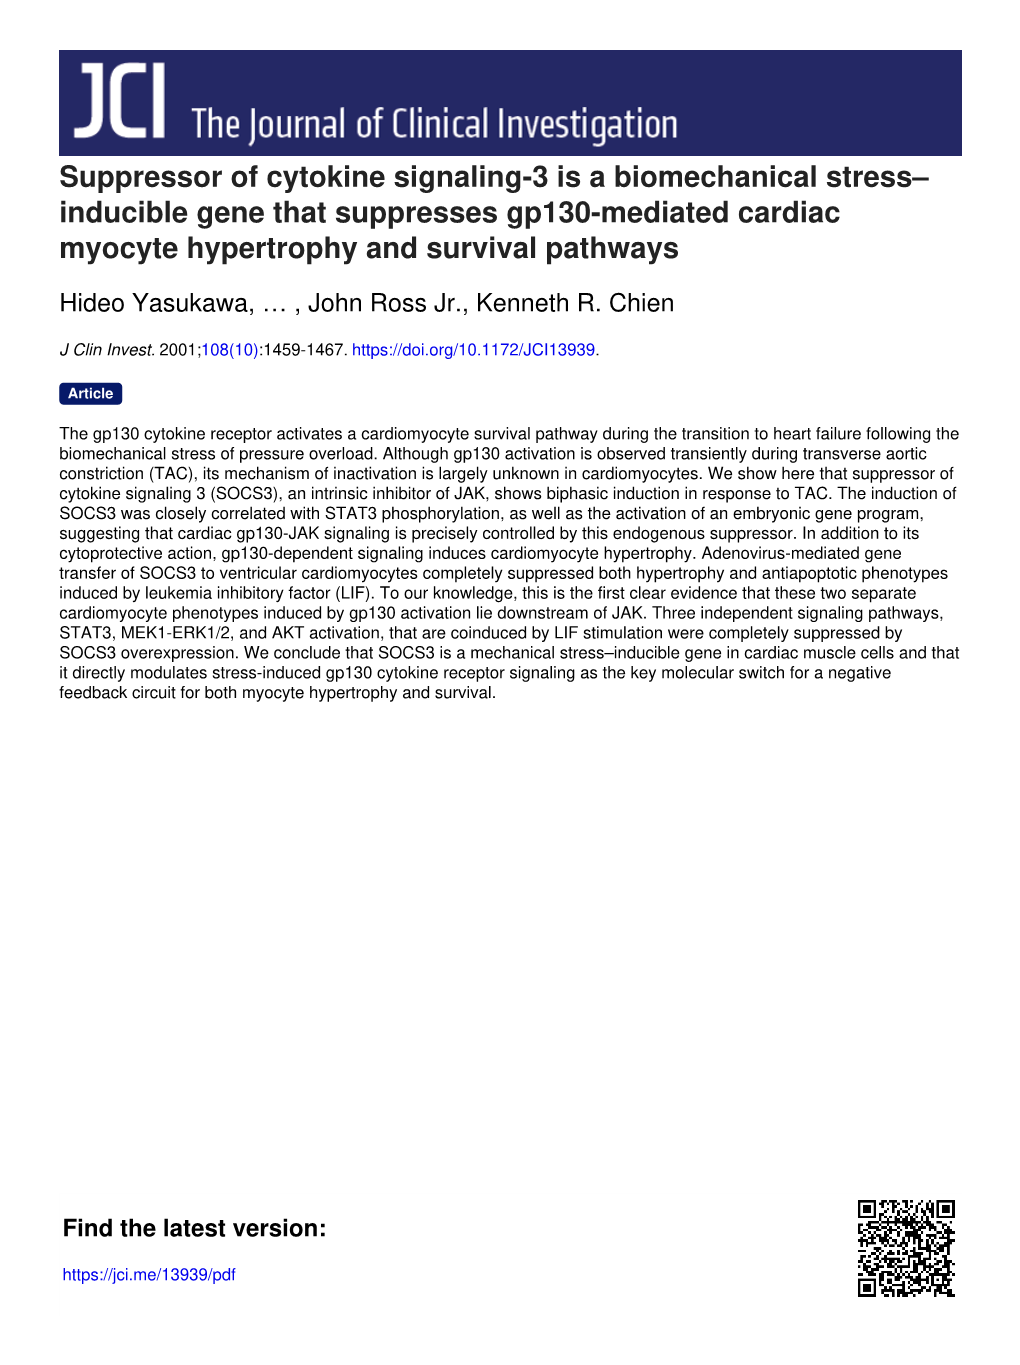 Inducible Gene That Suppresses Gp130-Mediated Cardiac Myocyte Hypertrophy and Survival Pathways